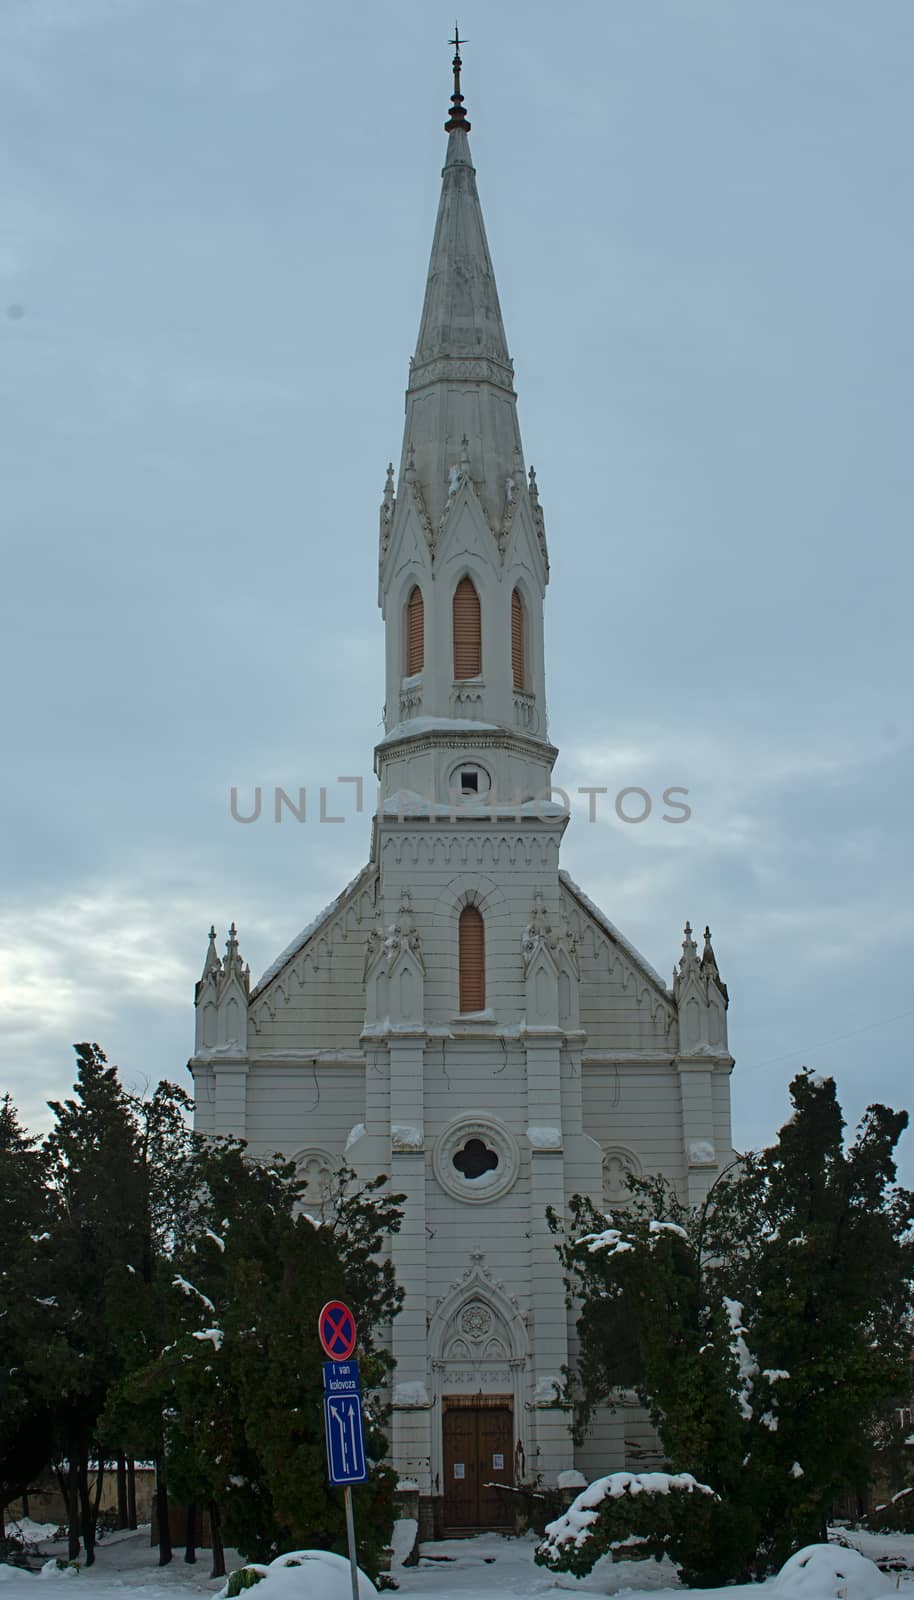 The Reformed Church is a Protestant denomination church in Zrenjanin, Serbia. It was built in 1891. by sheriffkule